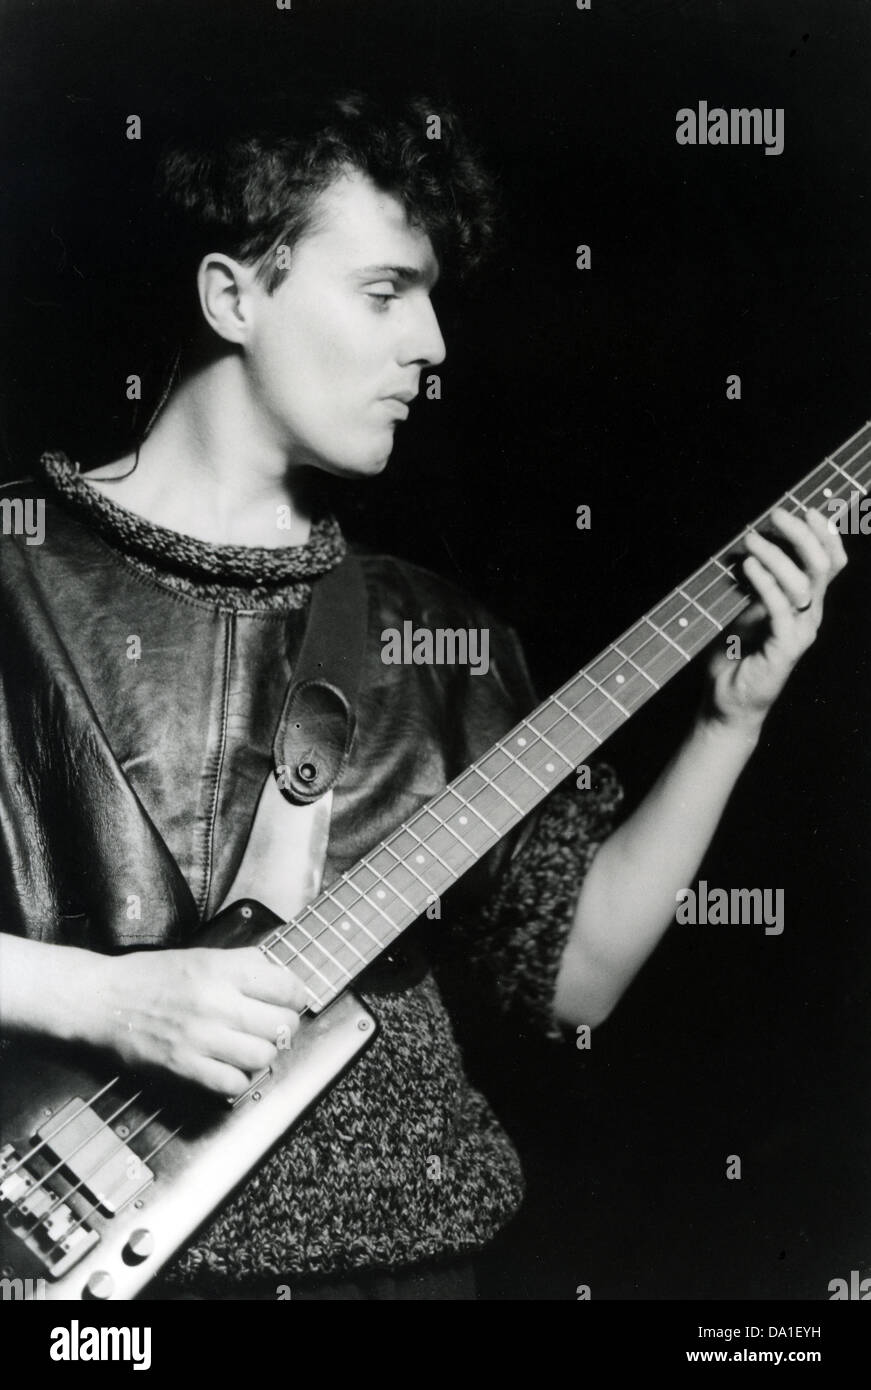 TEARS FOR FEARS  UK pop duo  with  Curt Smith about 1990. Photo Clare Muller Stock Photo